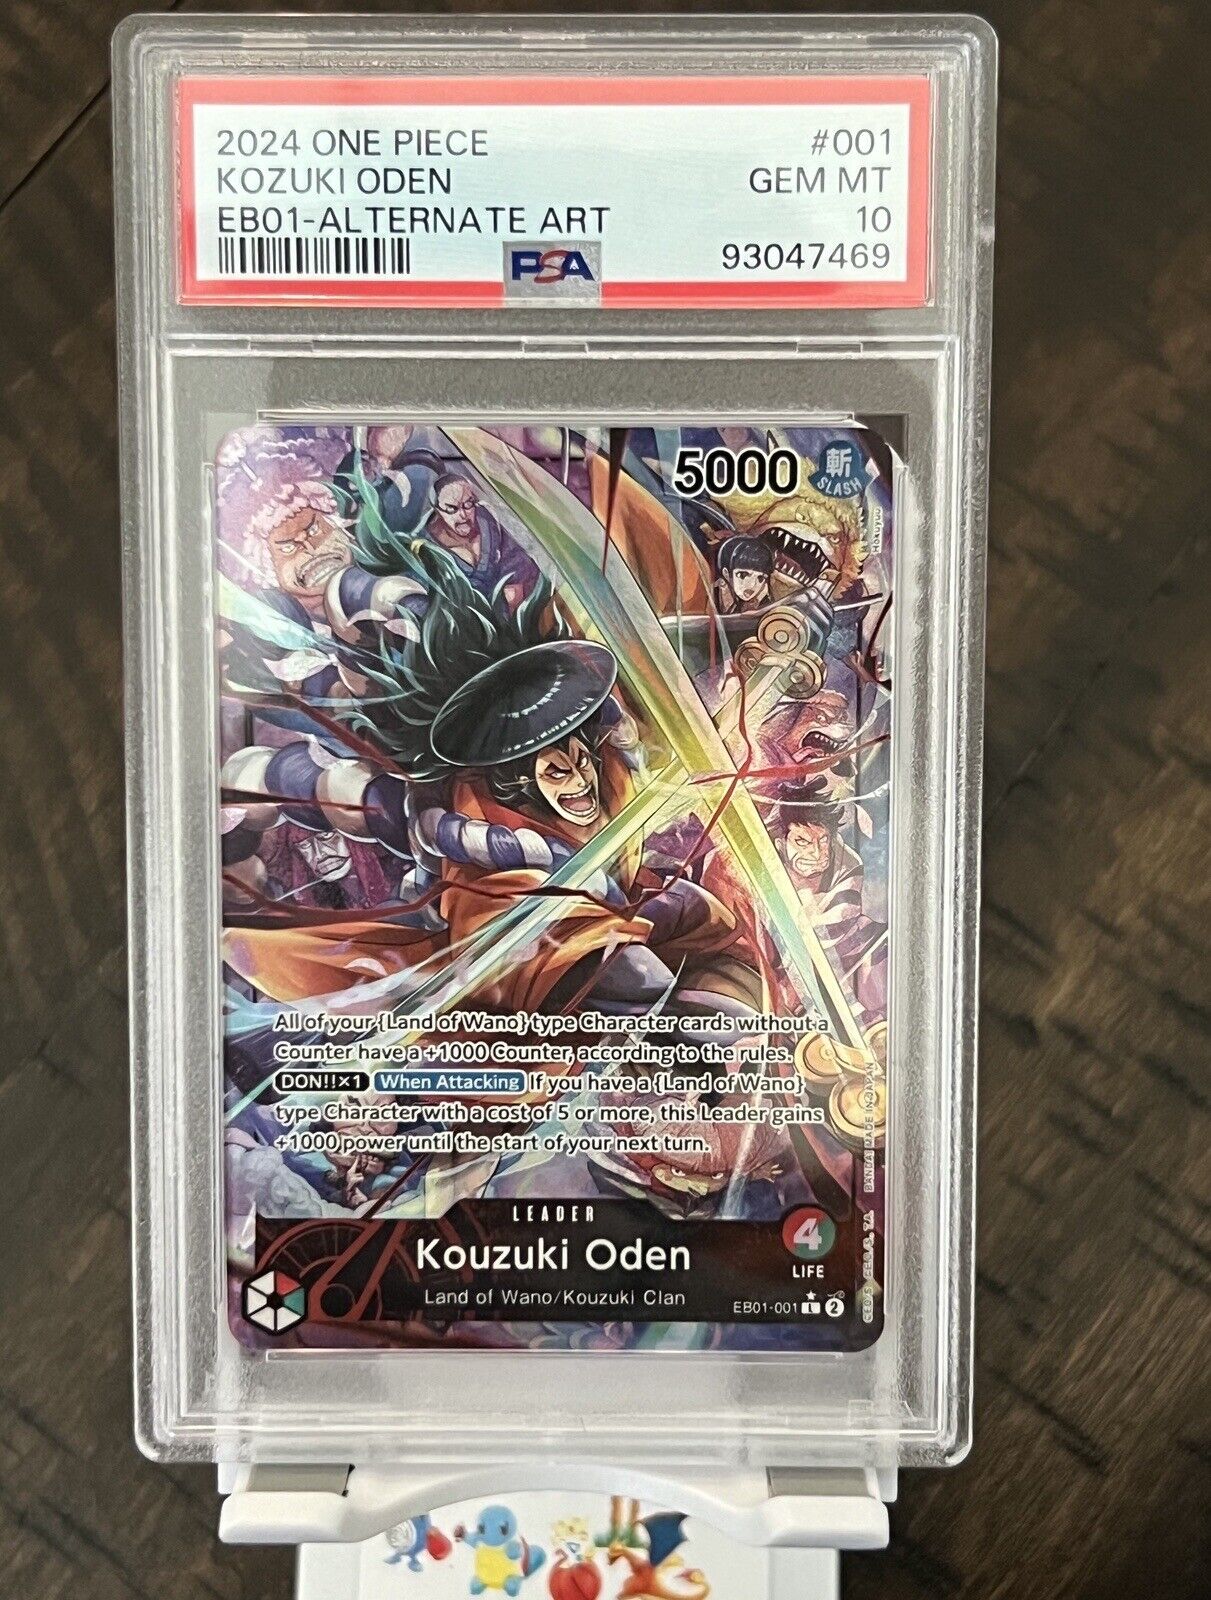 2024 ONE PIECE EXTRA BOOSTER -MEMORIAL COLLECTION- #001 KOZUKI ODEN PSA 10